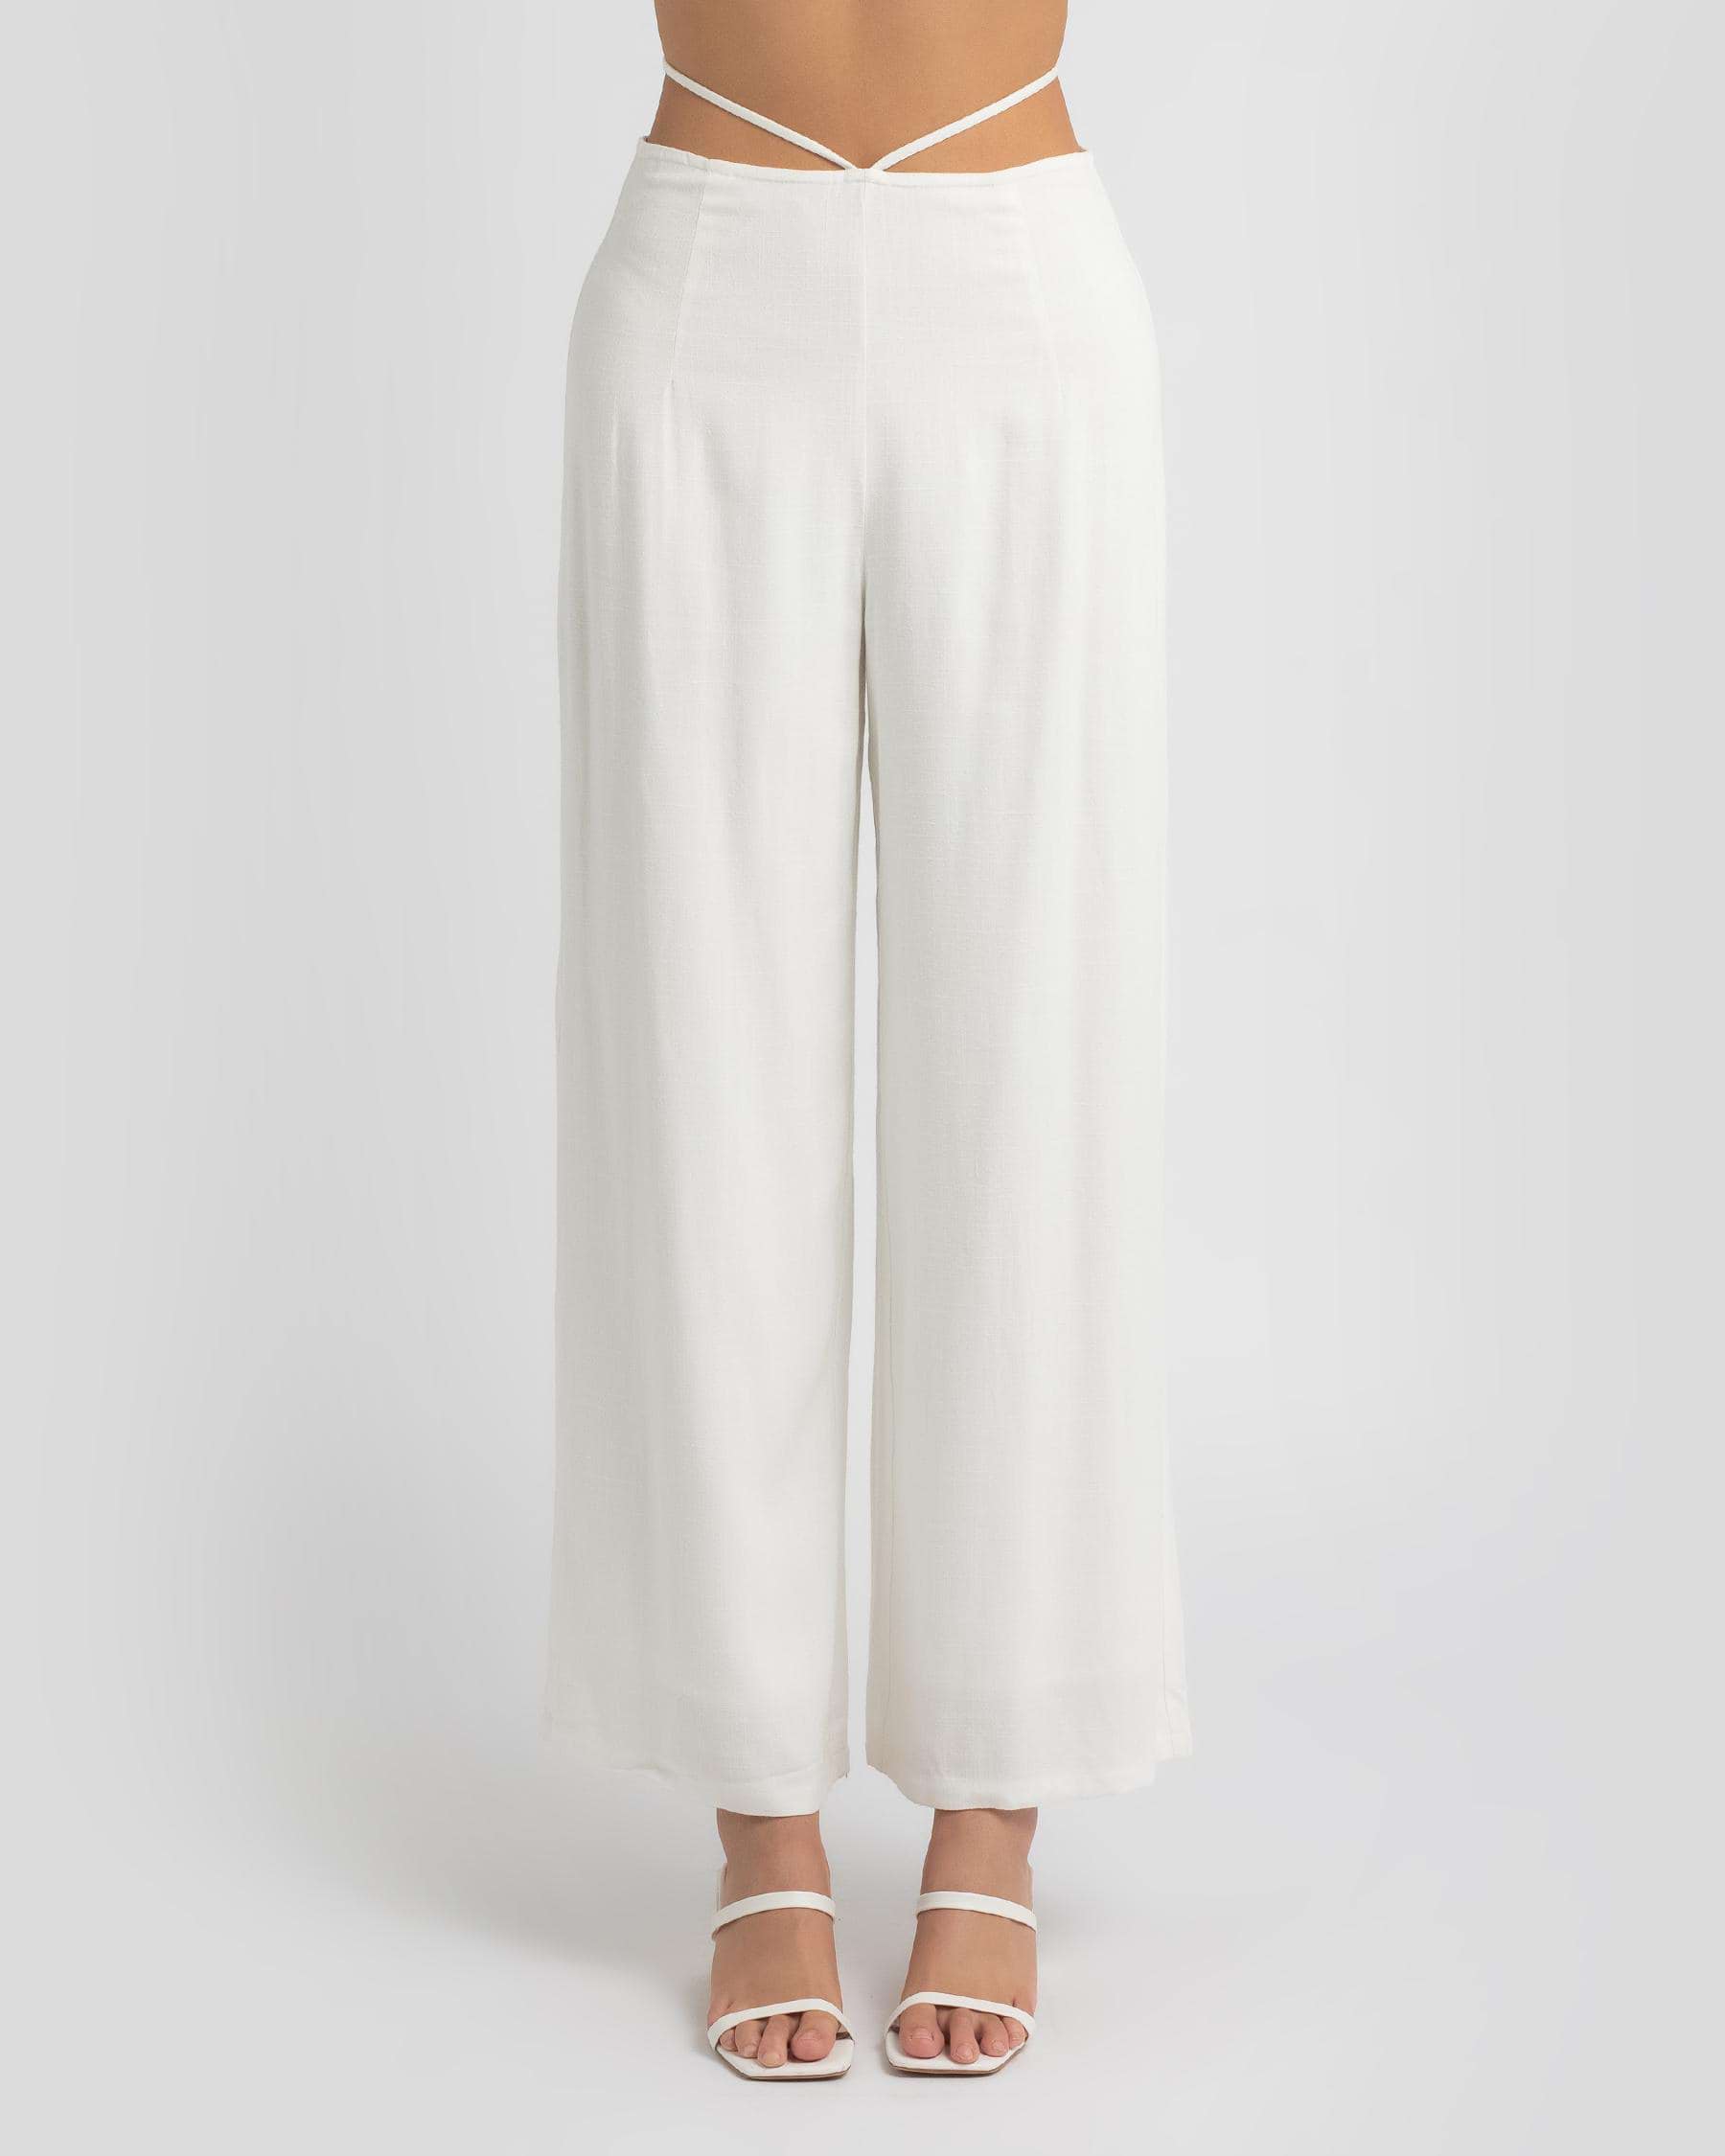 Shop Ava And Ever Vixon Pants In Cream - Fast Shipping & Easy Returns ...